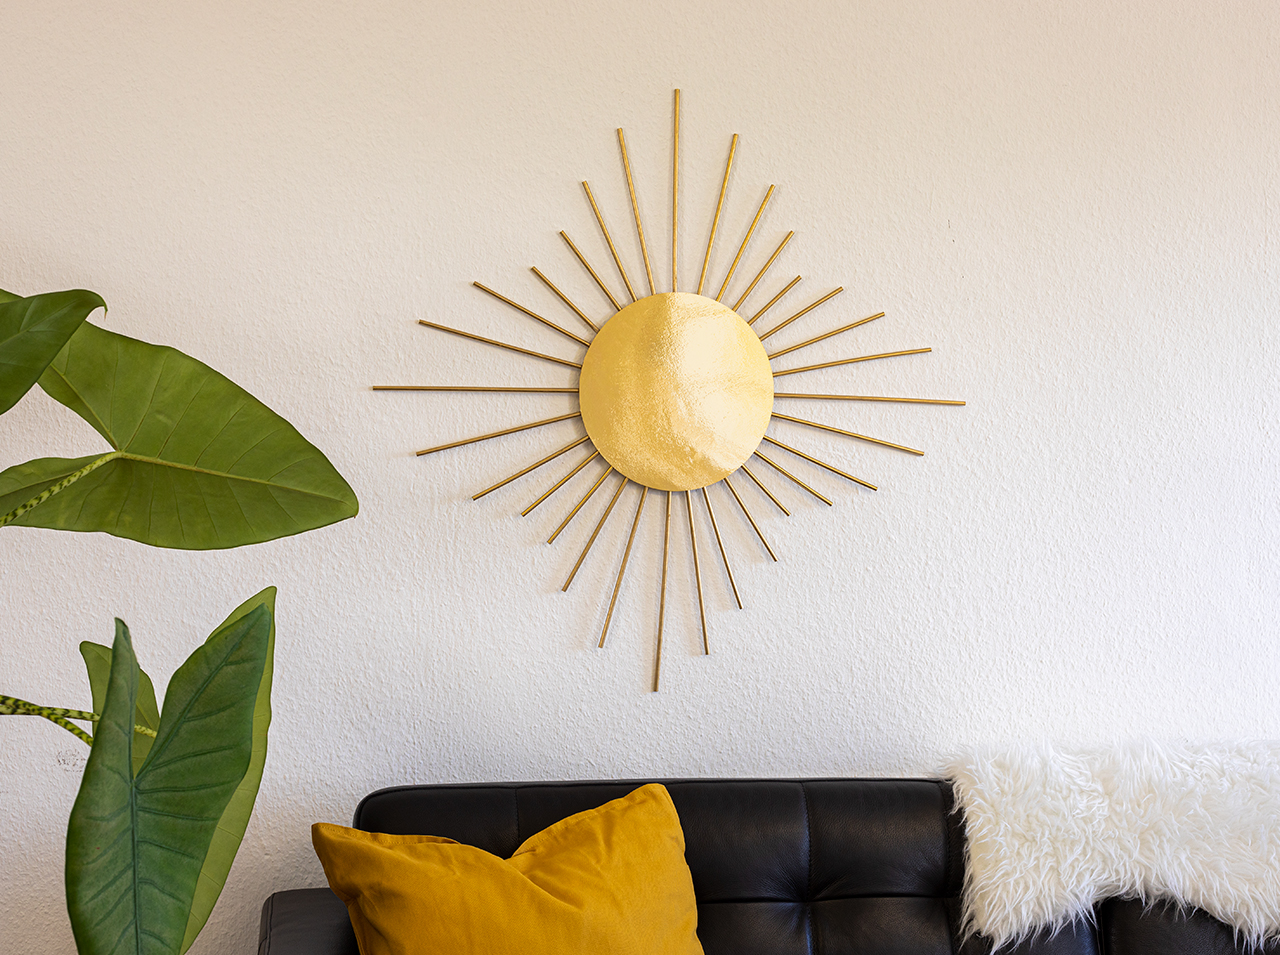 A mirror that looks like the sun, made with a circular piece of gold-colored mirror-effect foil surrounded by golden wooden dowels, hangs on a white wall.